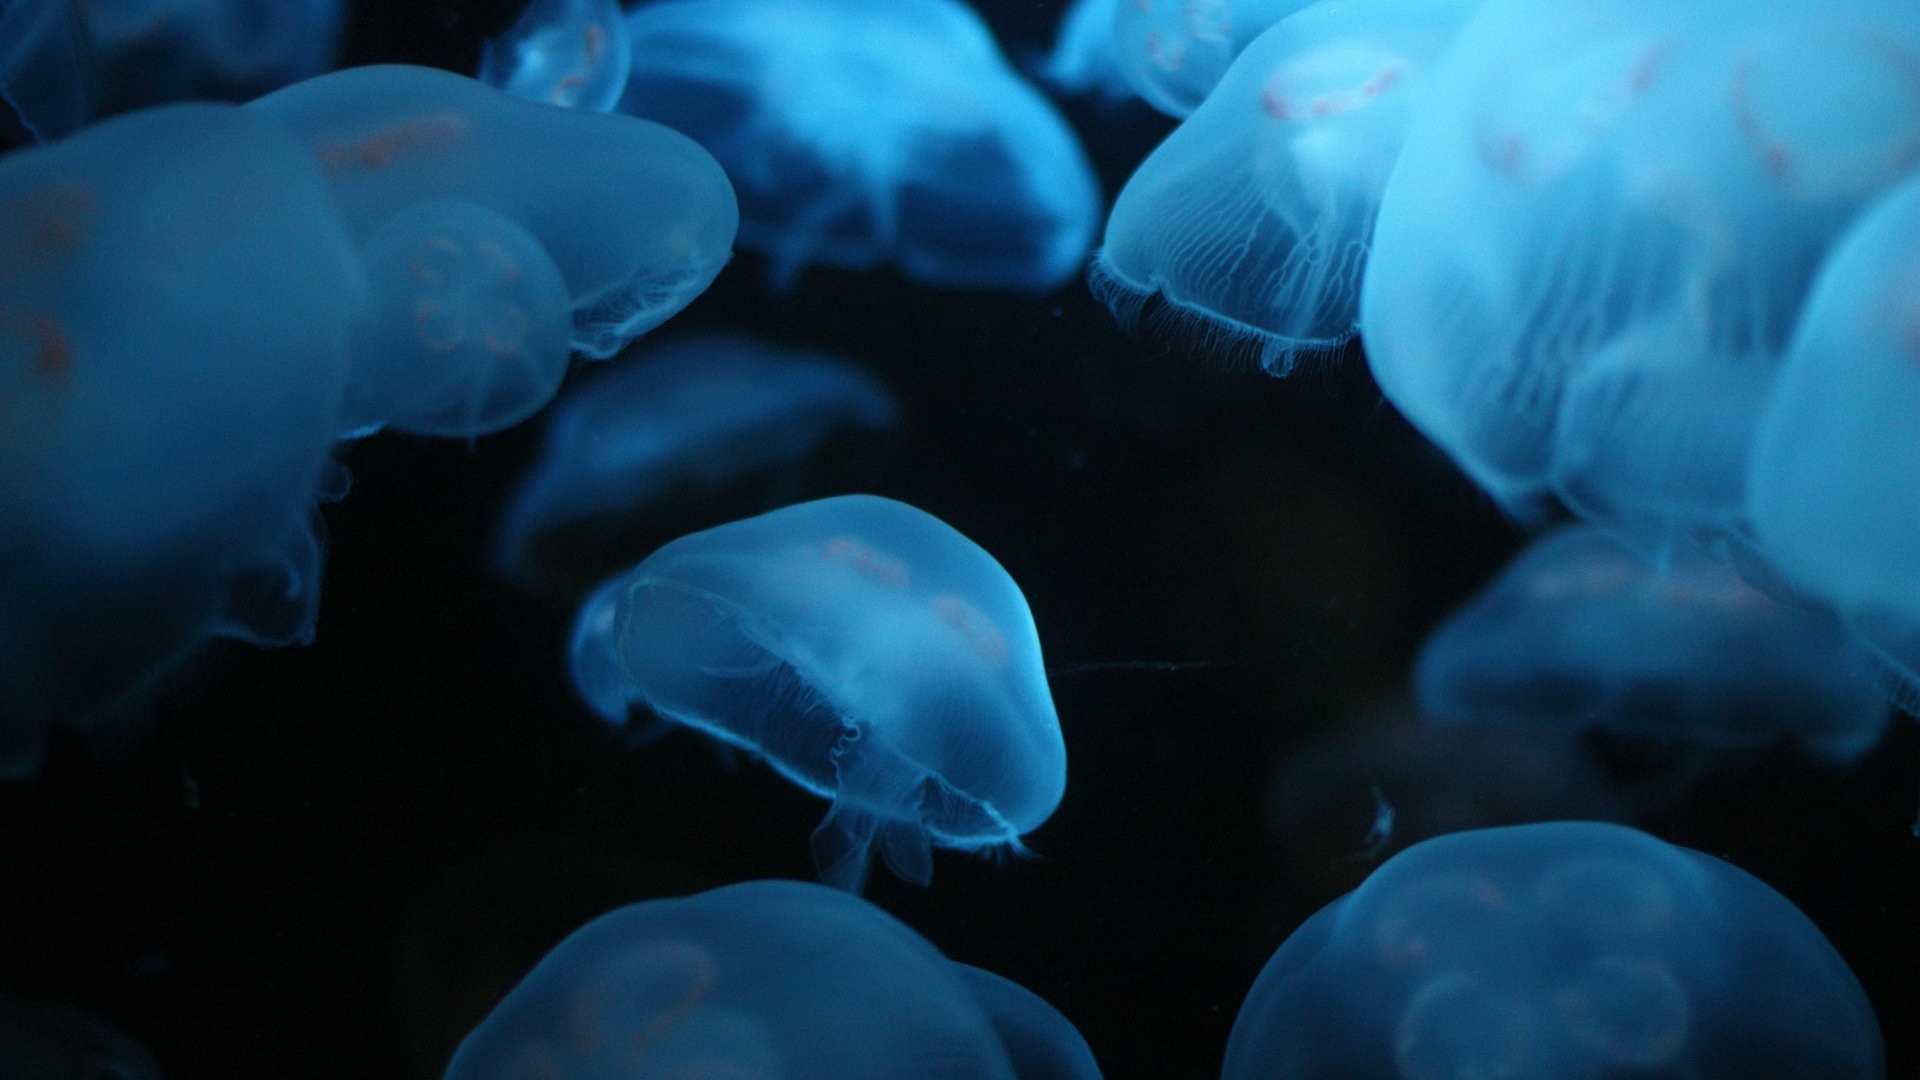 1920x1080 3d Jellyfish Hd Live Wallpaper-1080p Underwater Collection | Unique HD .